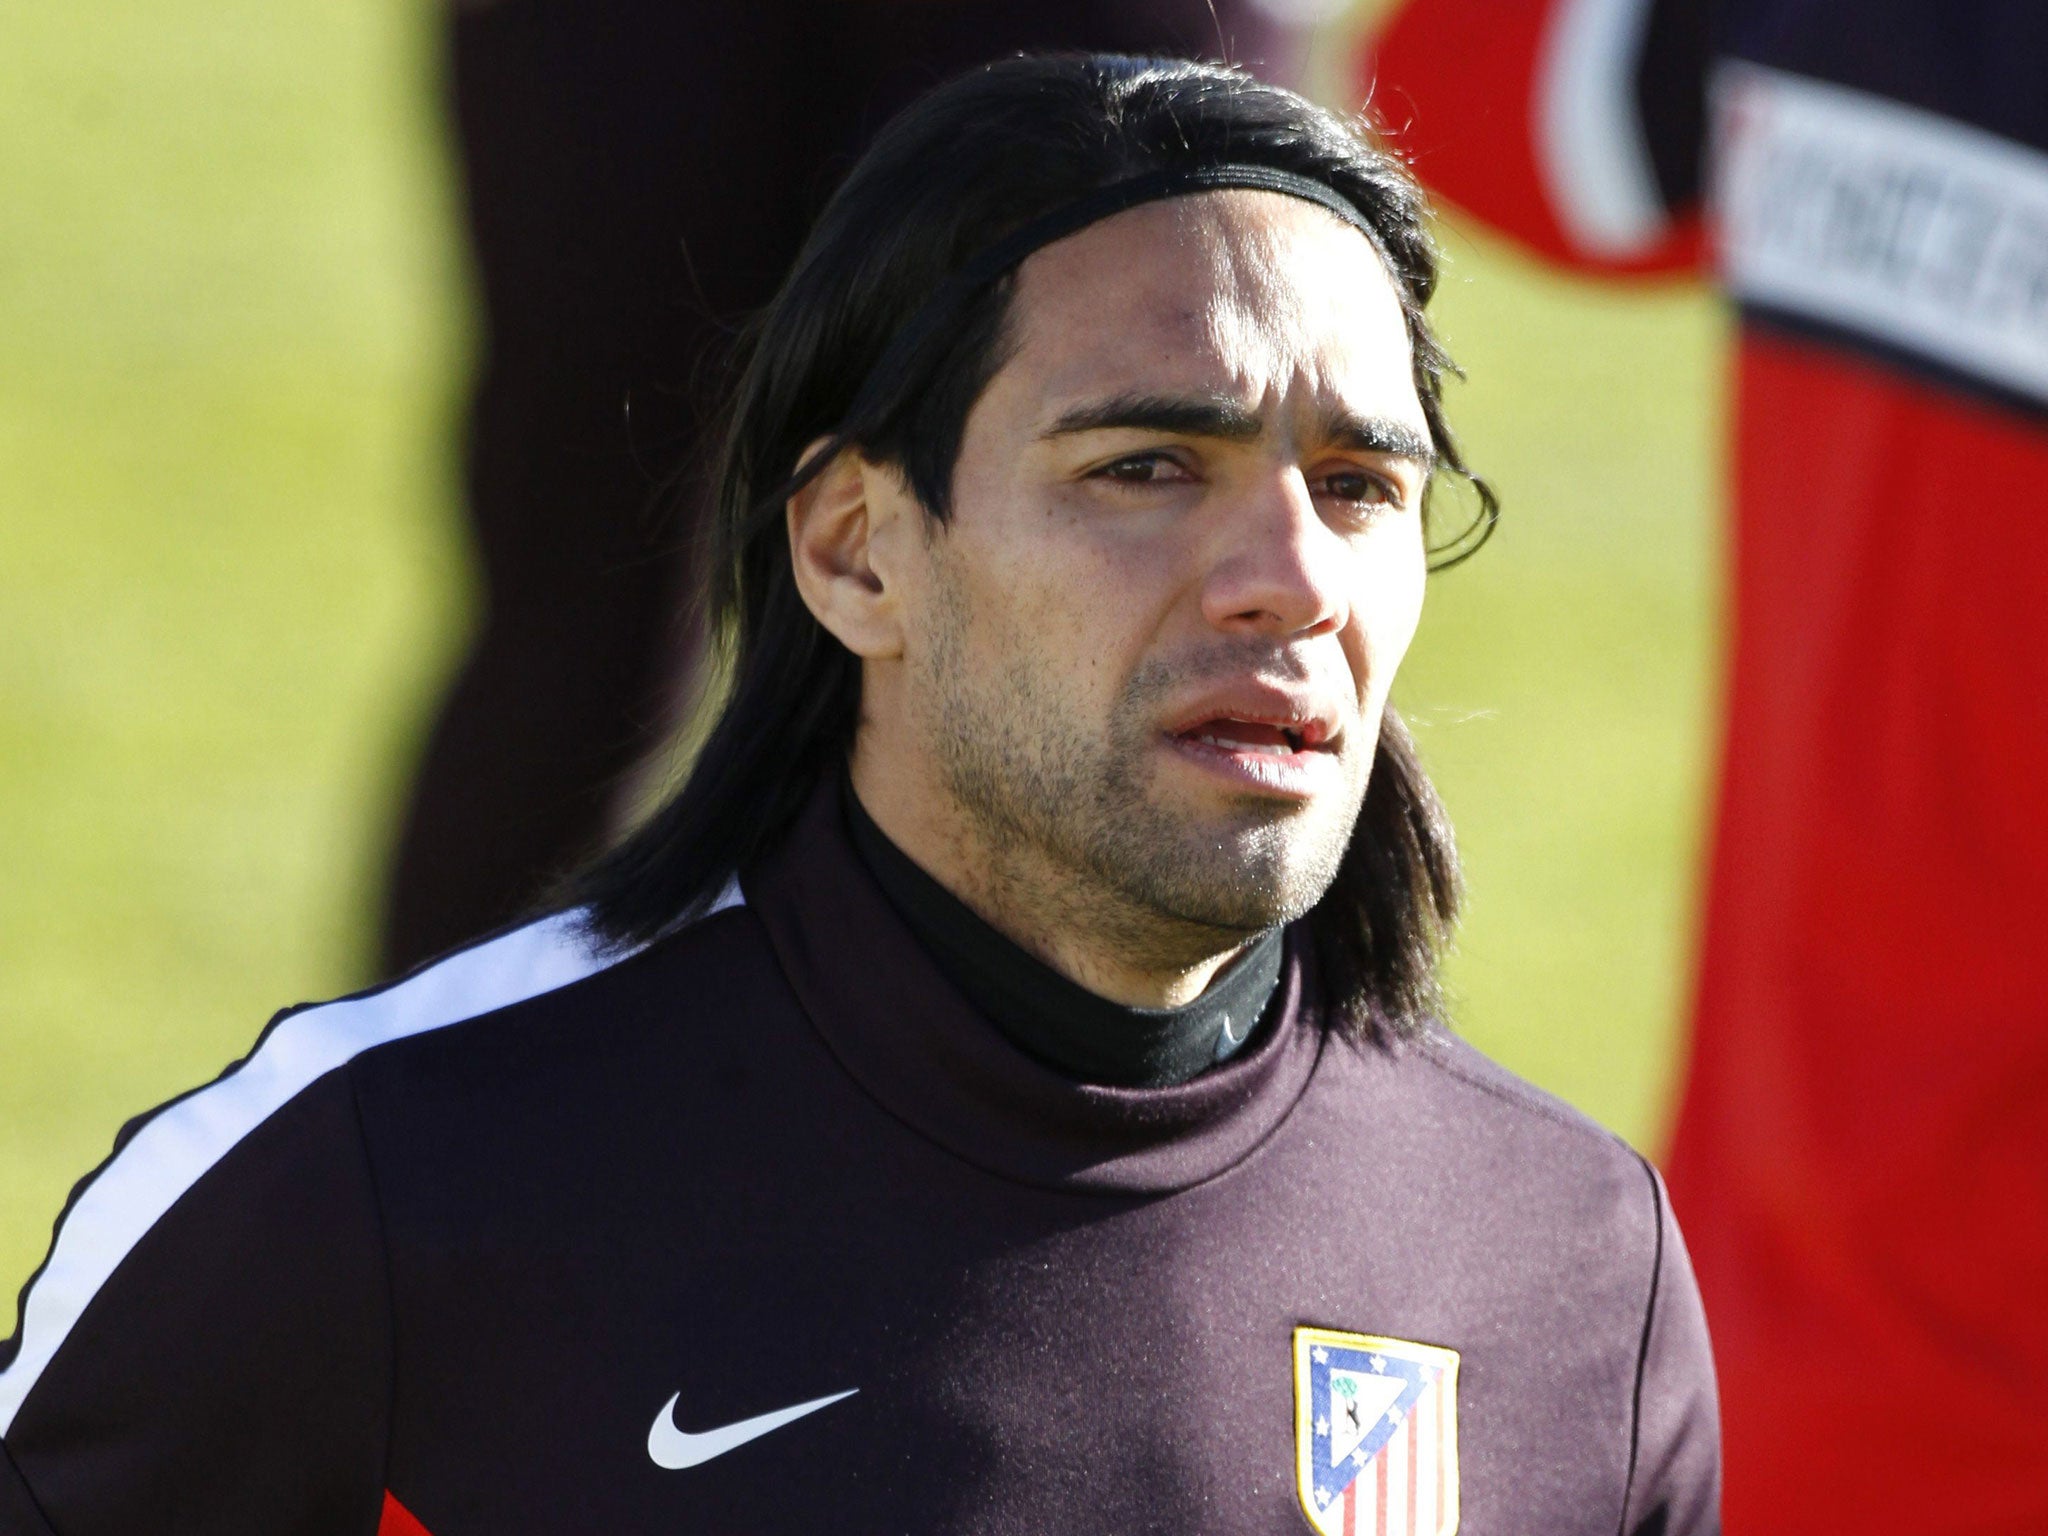 Radamel Falcao’s move to Chelsea has been one of the big surprises of the transfer window so far